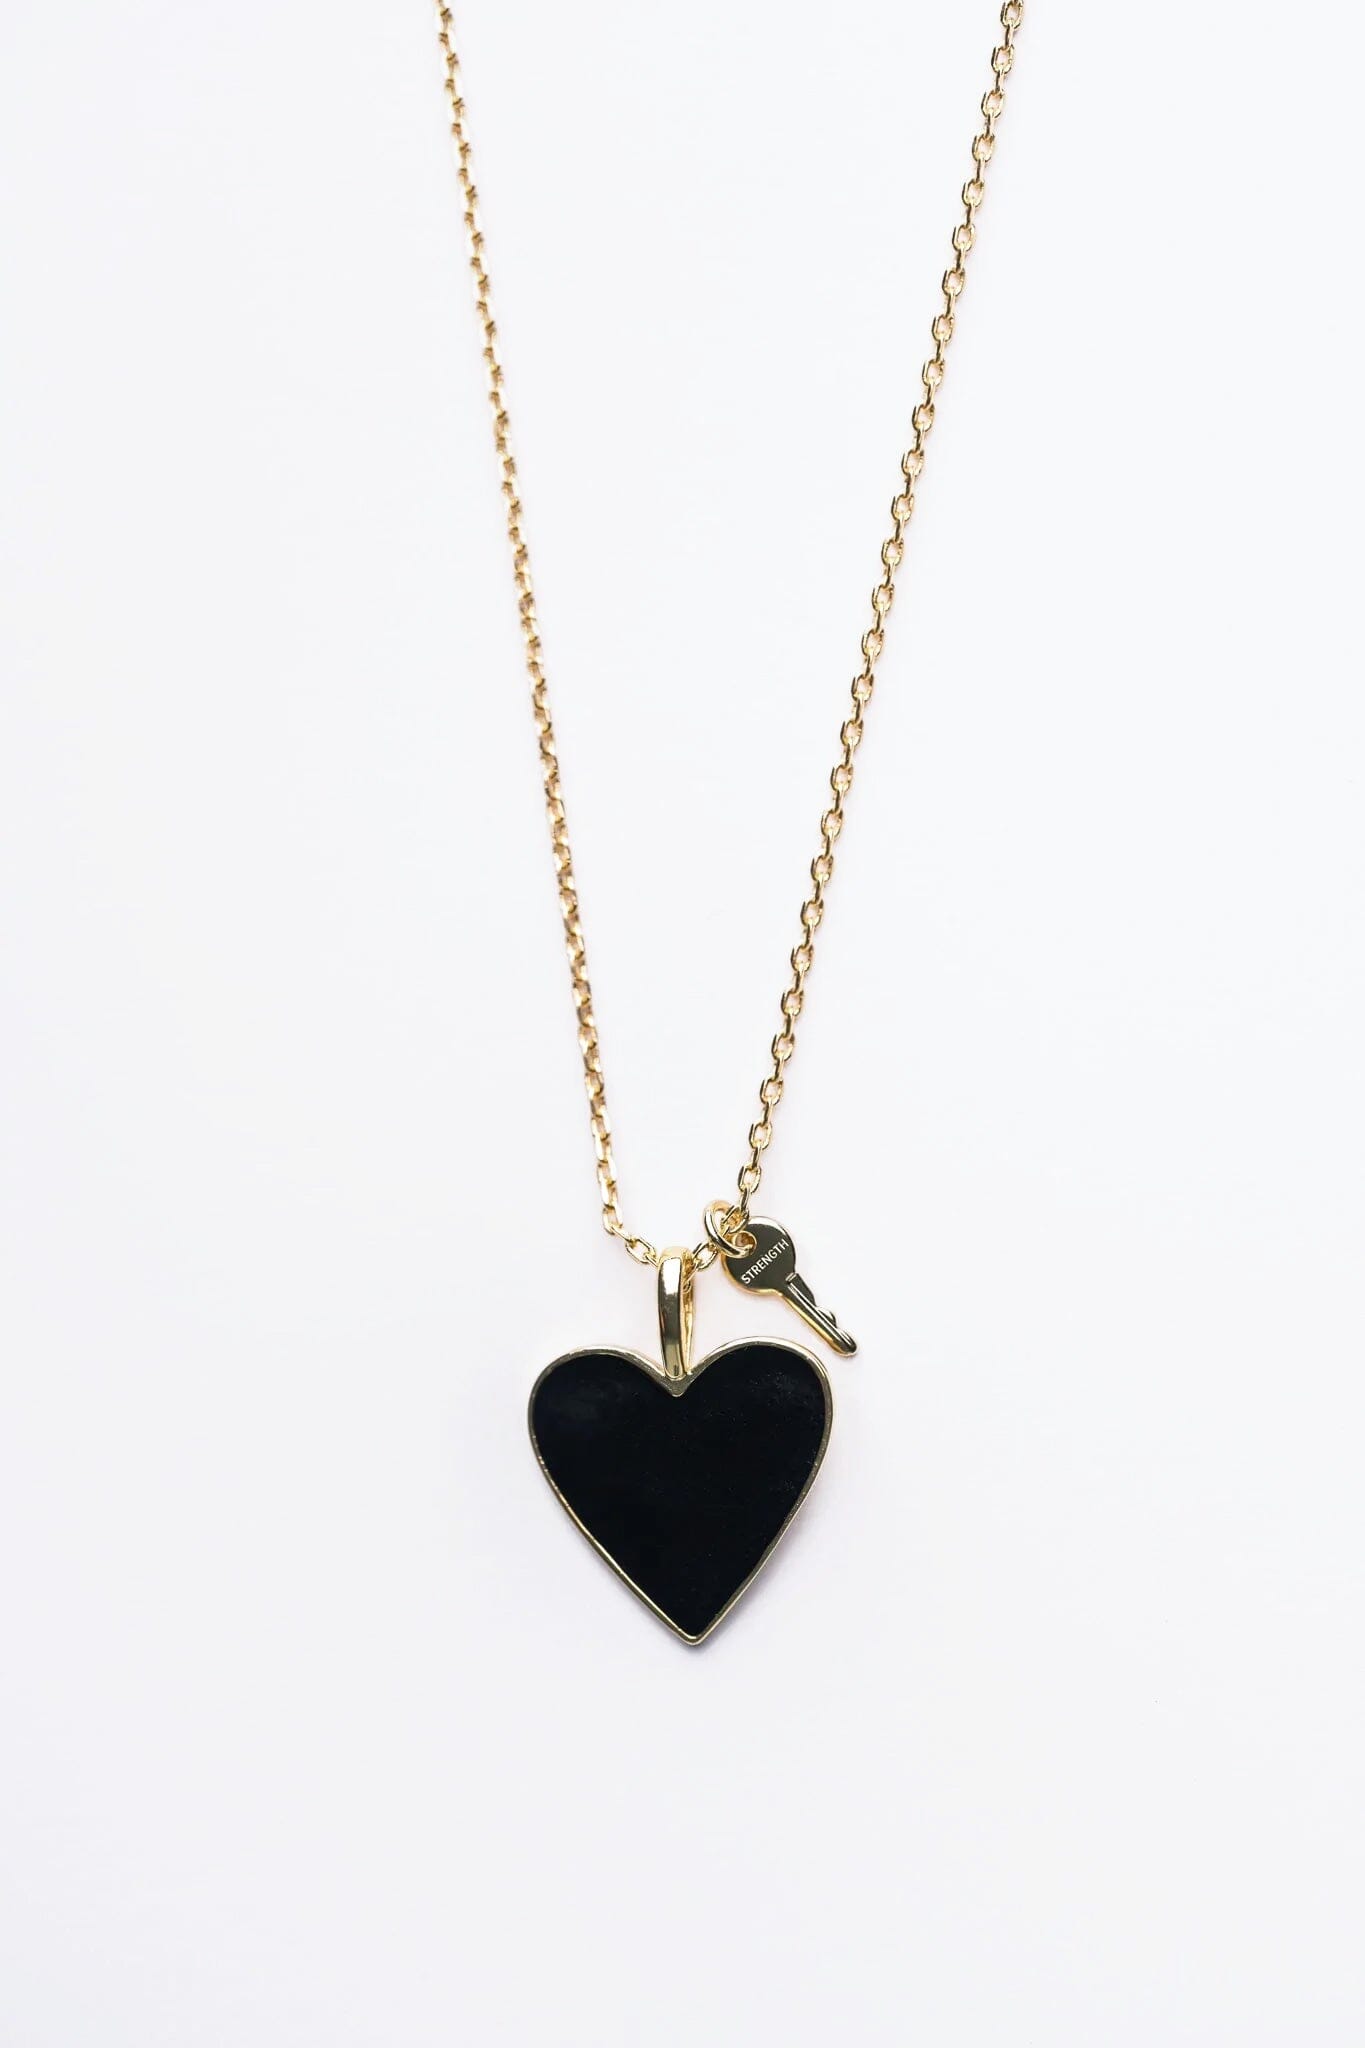 Black Enamel Heart and Mini Key Necklace Necklaces The Giving Keys STRENGTH 